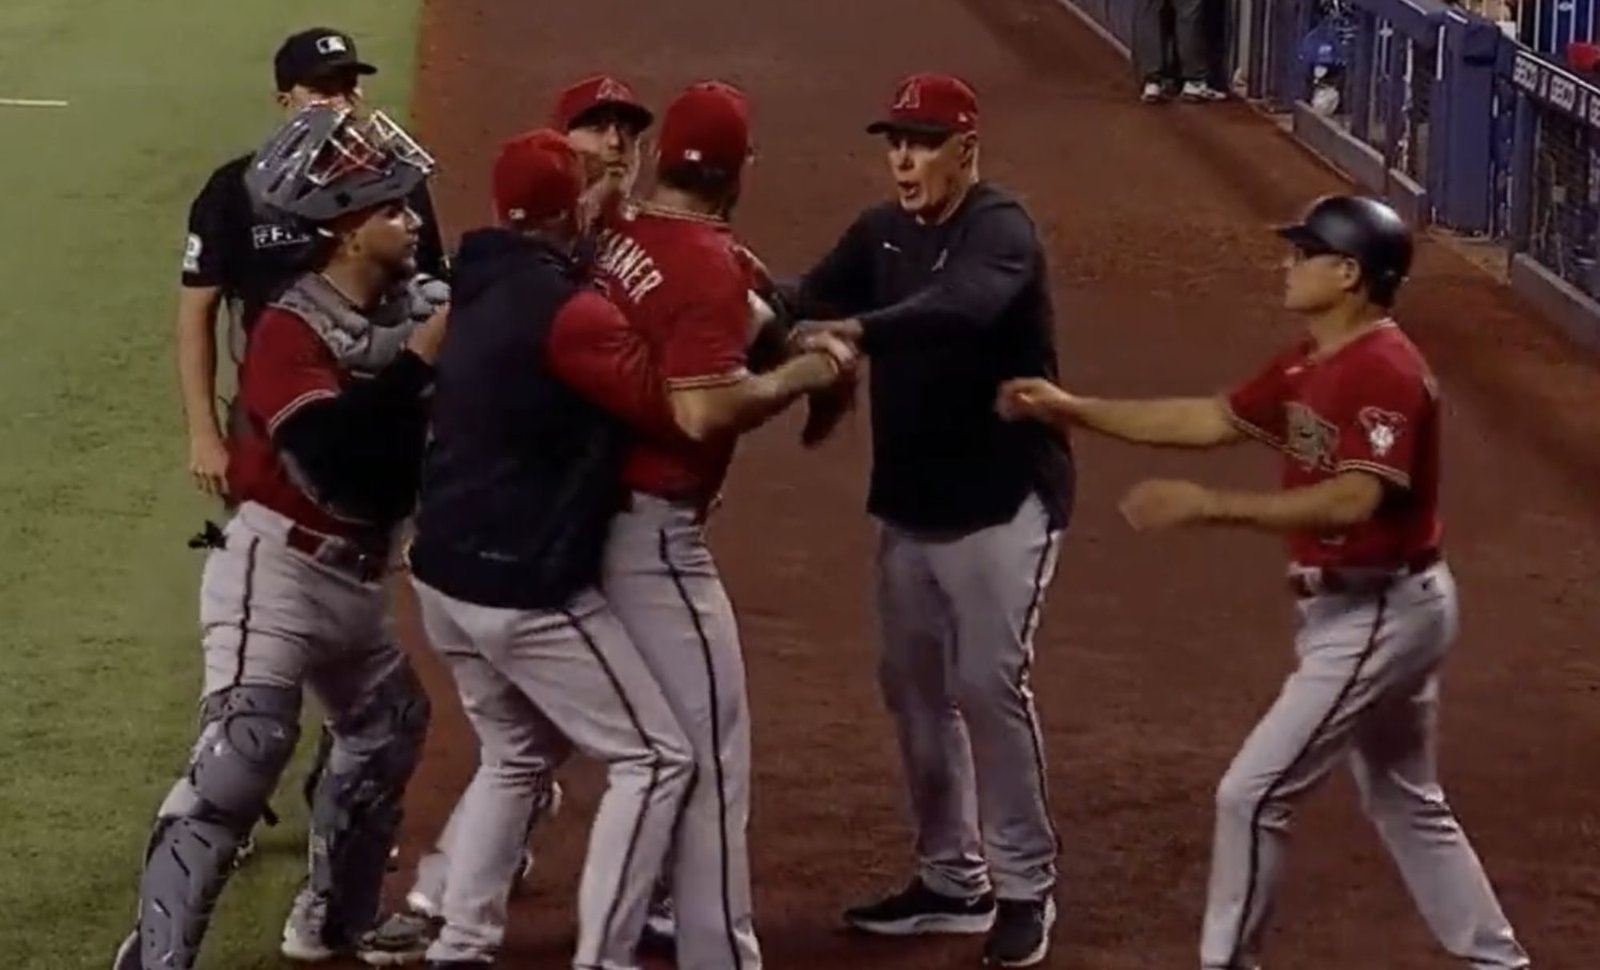 Watch: Madison Bumgarner ejected after altercation with umpire over sticky stuff check (Video)